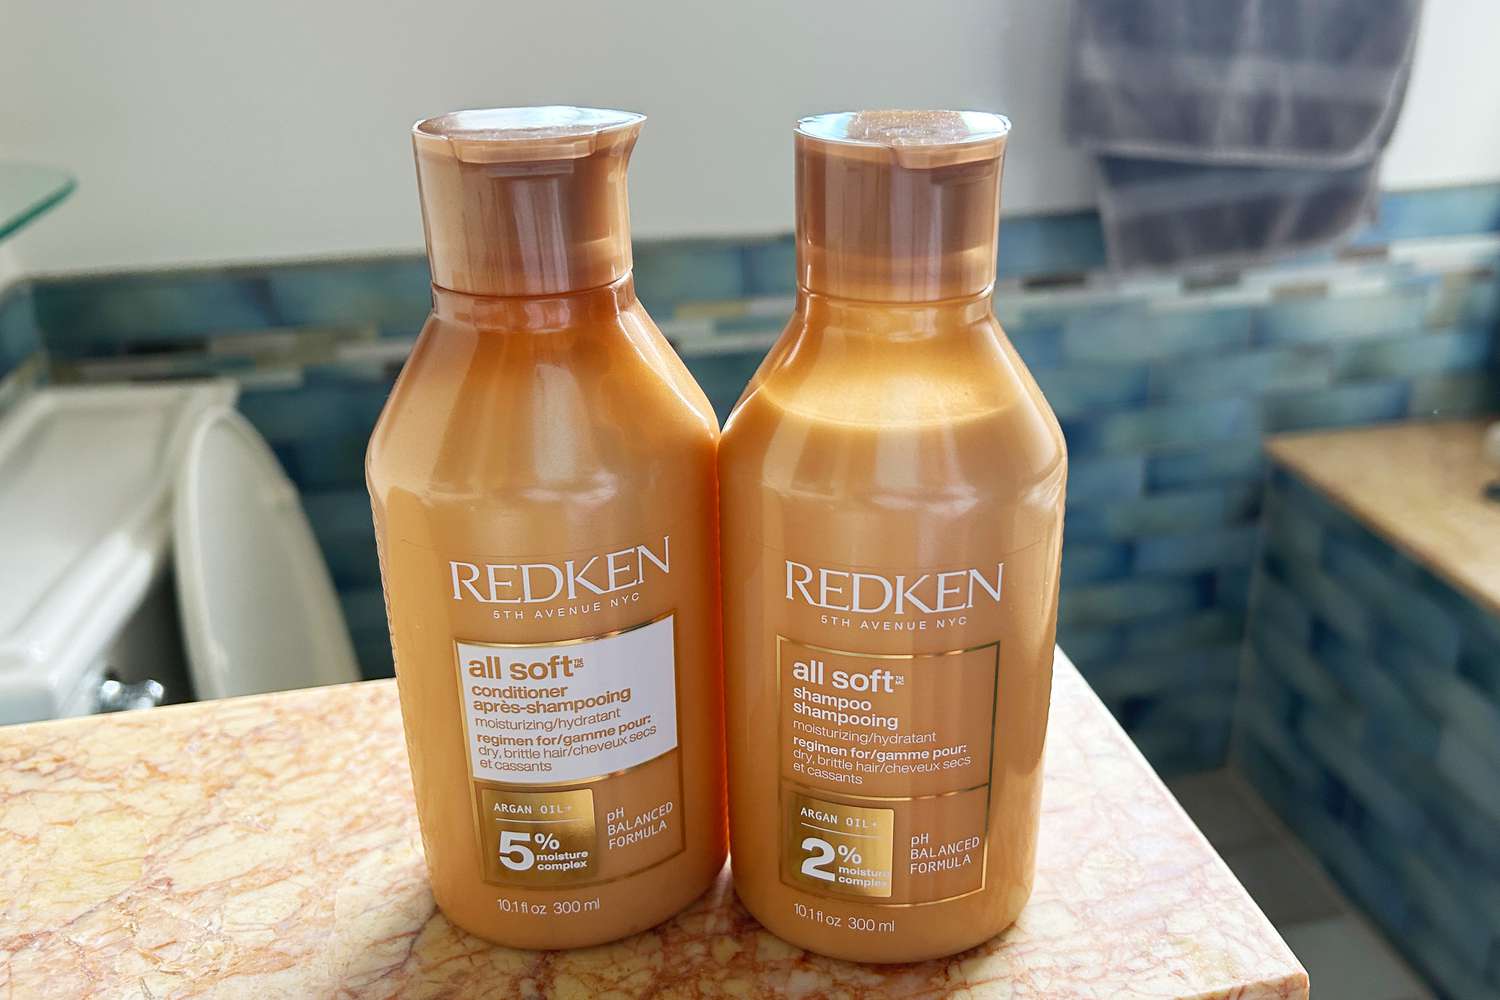 Bottles of the Redken All Soft Shampoo and Conditioner